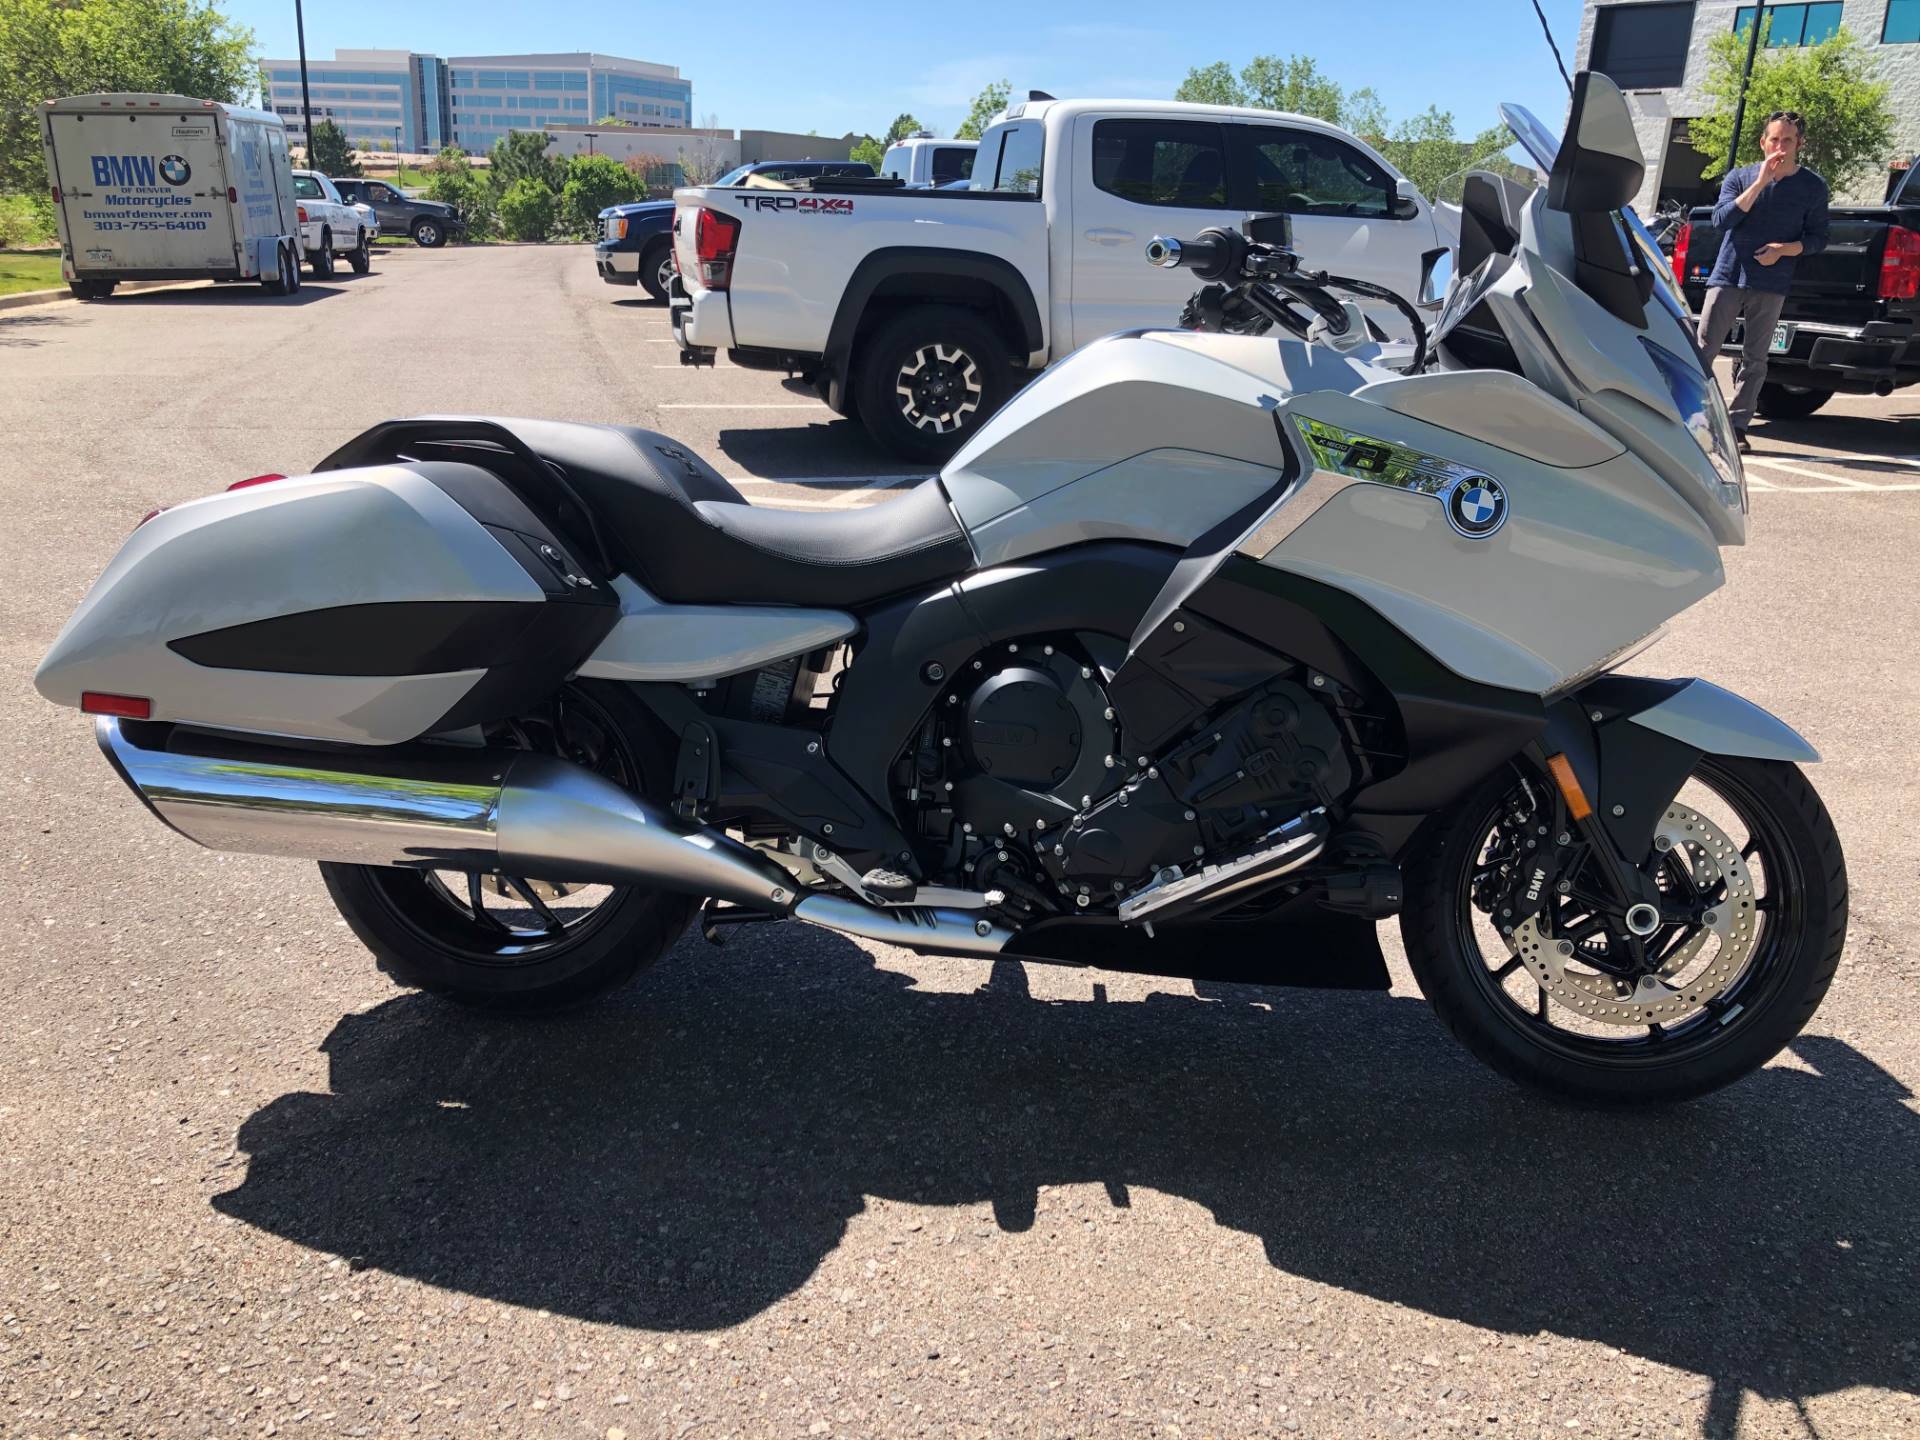 New Bmw K 1600 B Motorcycles In Centennial Co